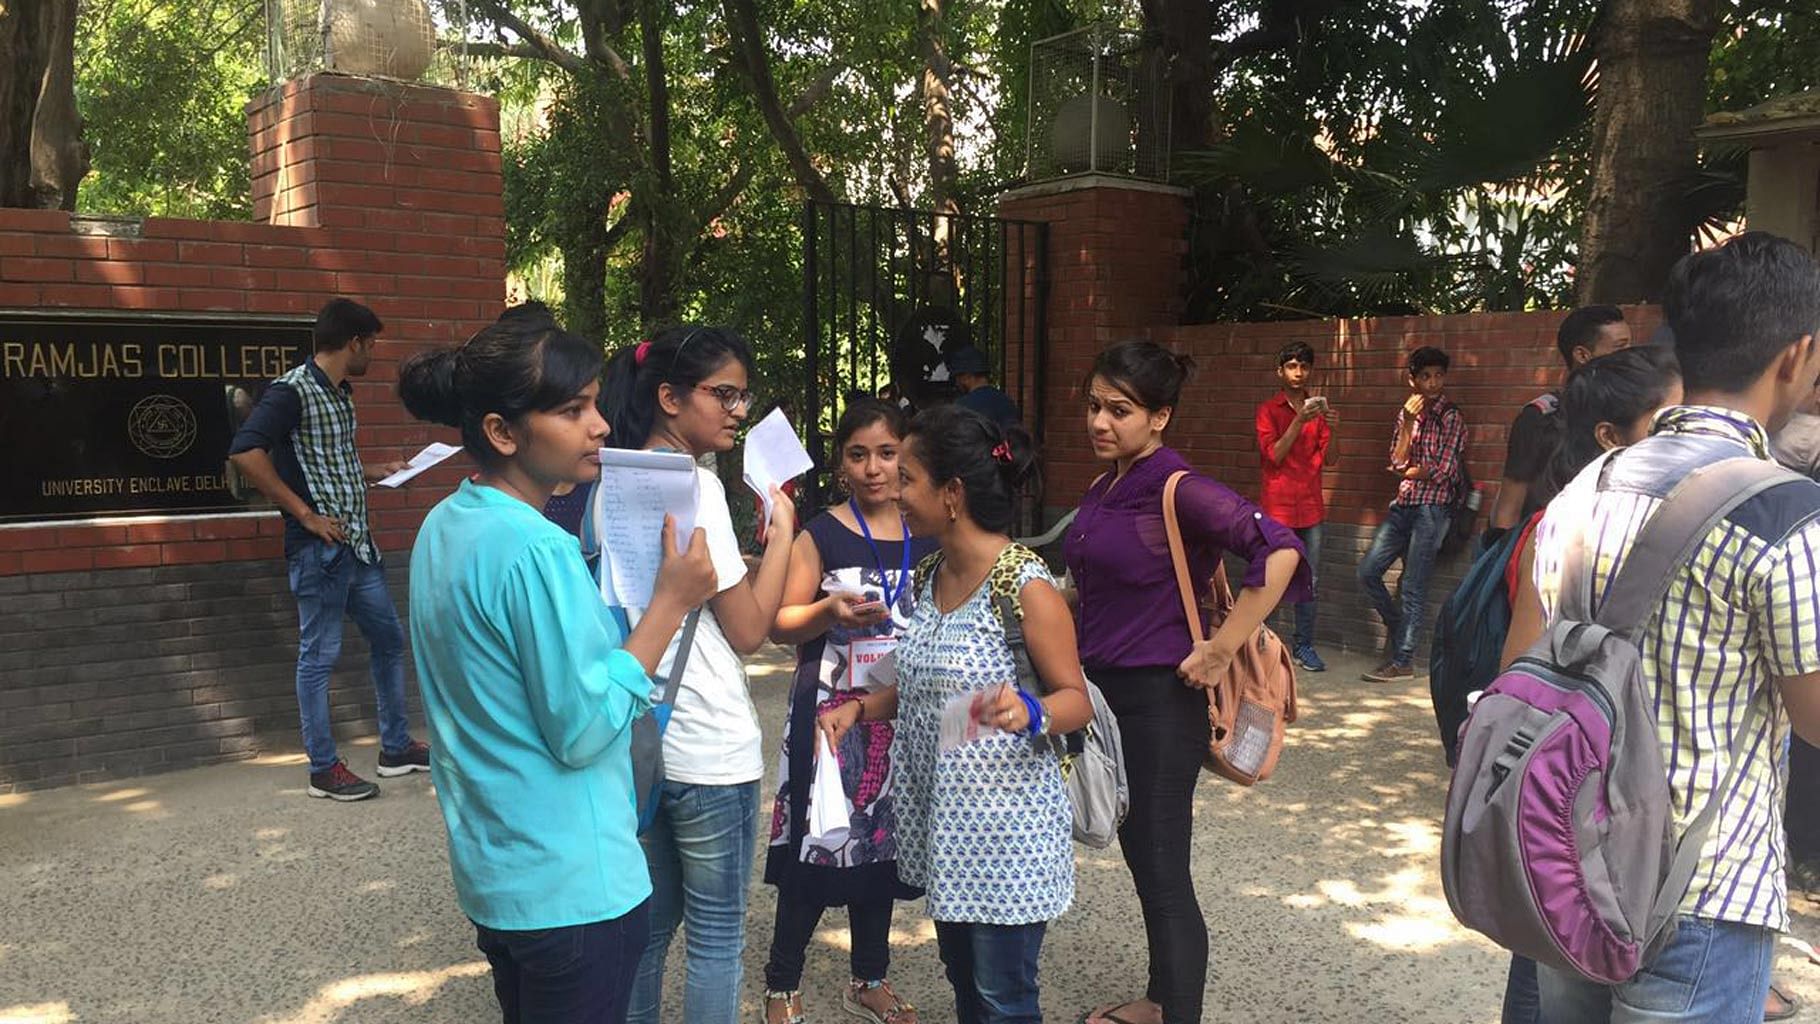 Students standing outside Ramjas College for admissions in Delhi on Thursday, 30 June 2016.